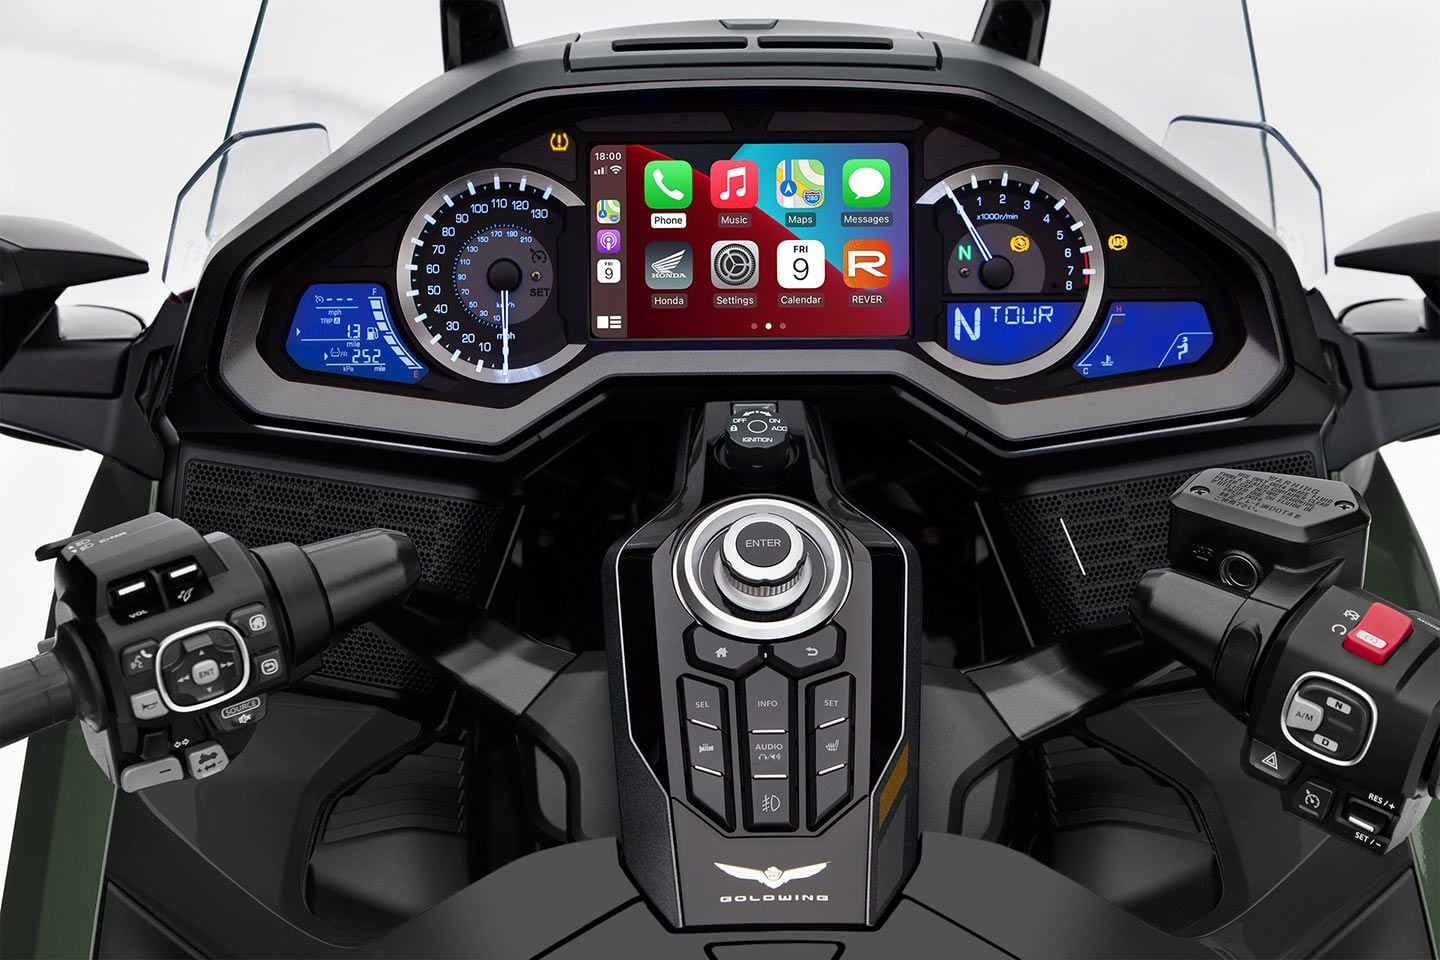 Full-featured 7-inch screen allows access to navigation, Apple CarPlay, Android Auto, four riding modes, traction control, Hill Start, and more.